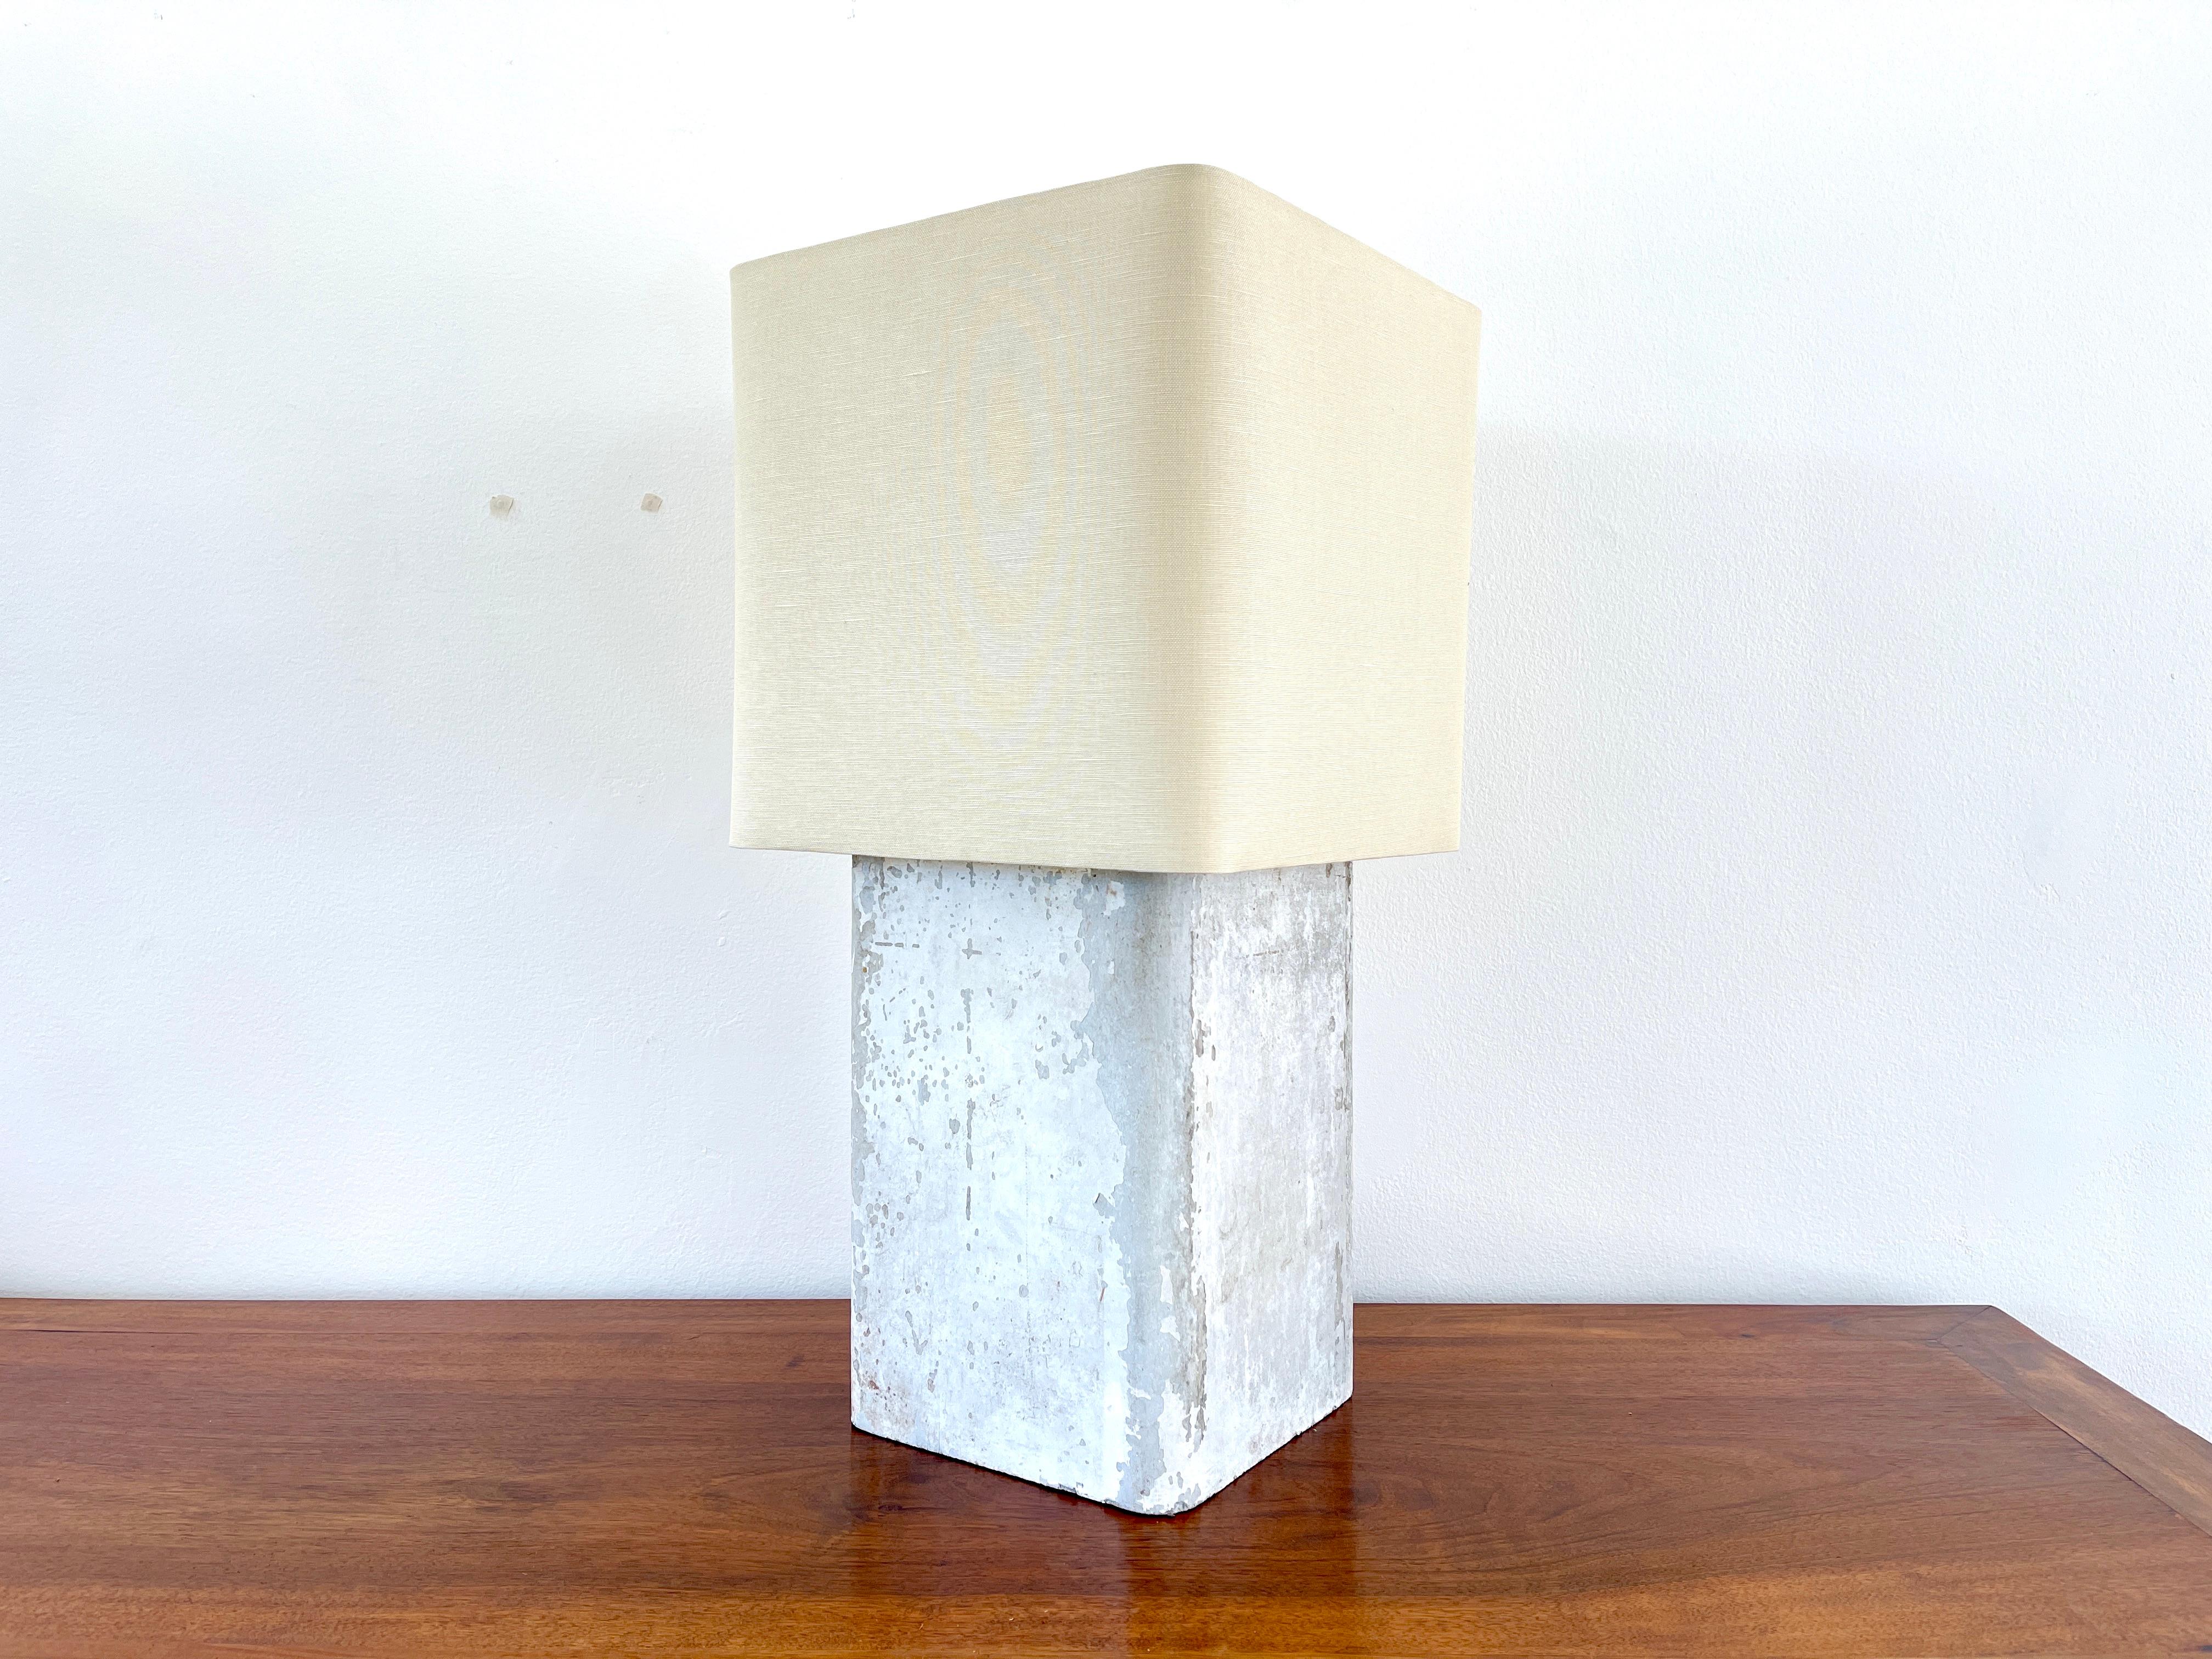 Willy Guhl concrete table lamp with linen shade 
Priced individually.

Measures: H - 24.25